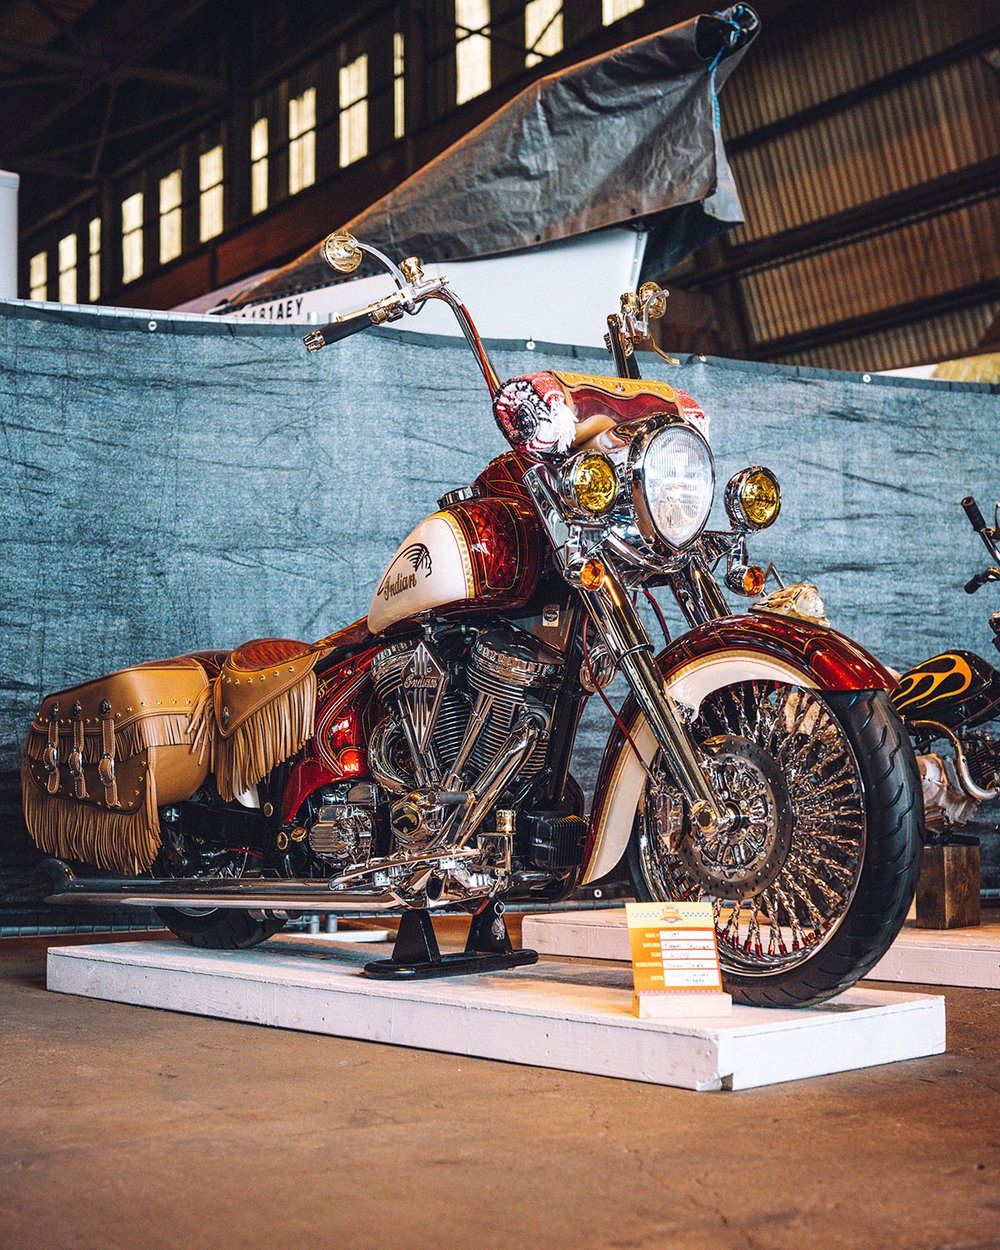 DIAMOND IN THE ROUGH - a wonderful gem that’s unnoticed - Robert Trottier’s 2009 Indian Chief 